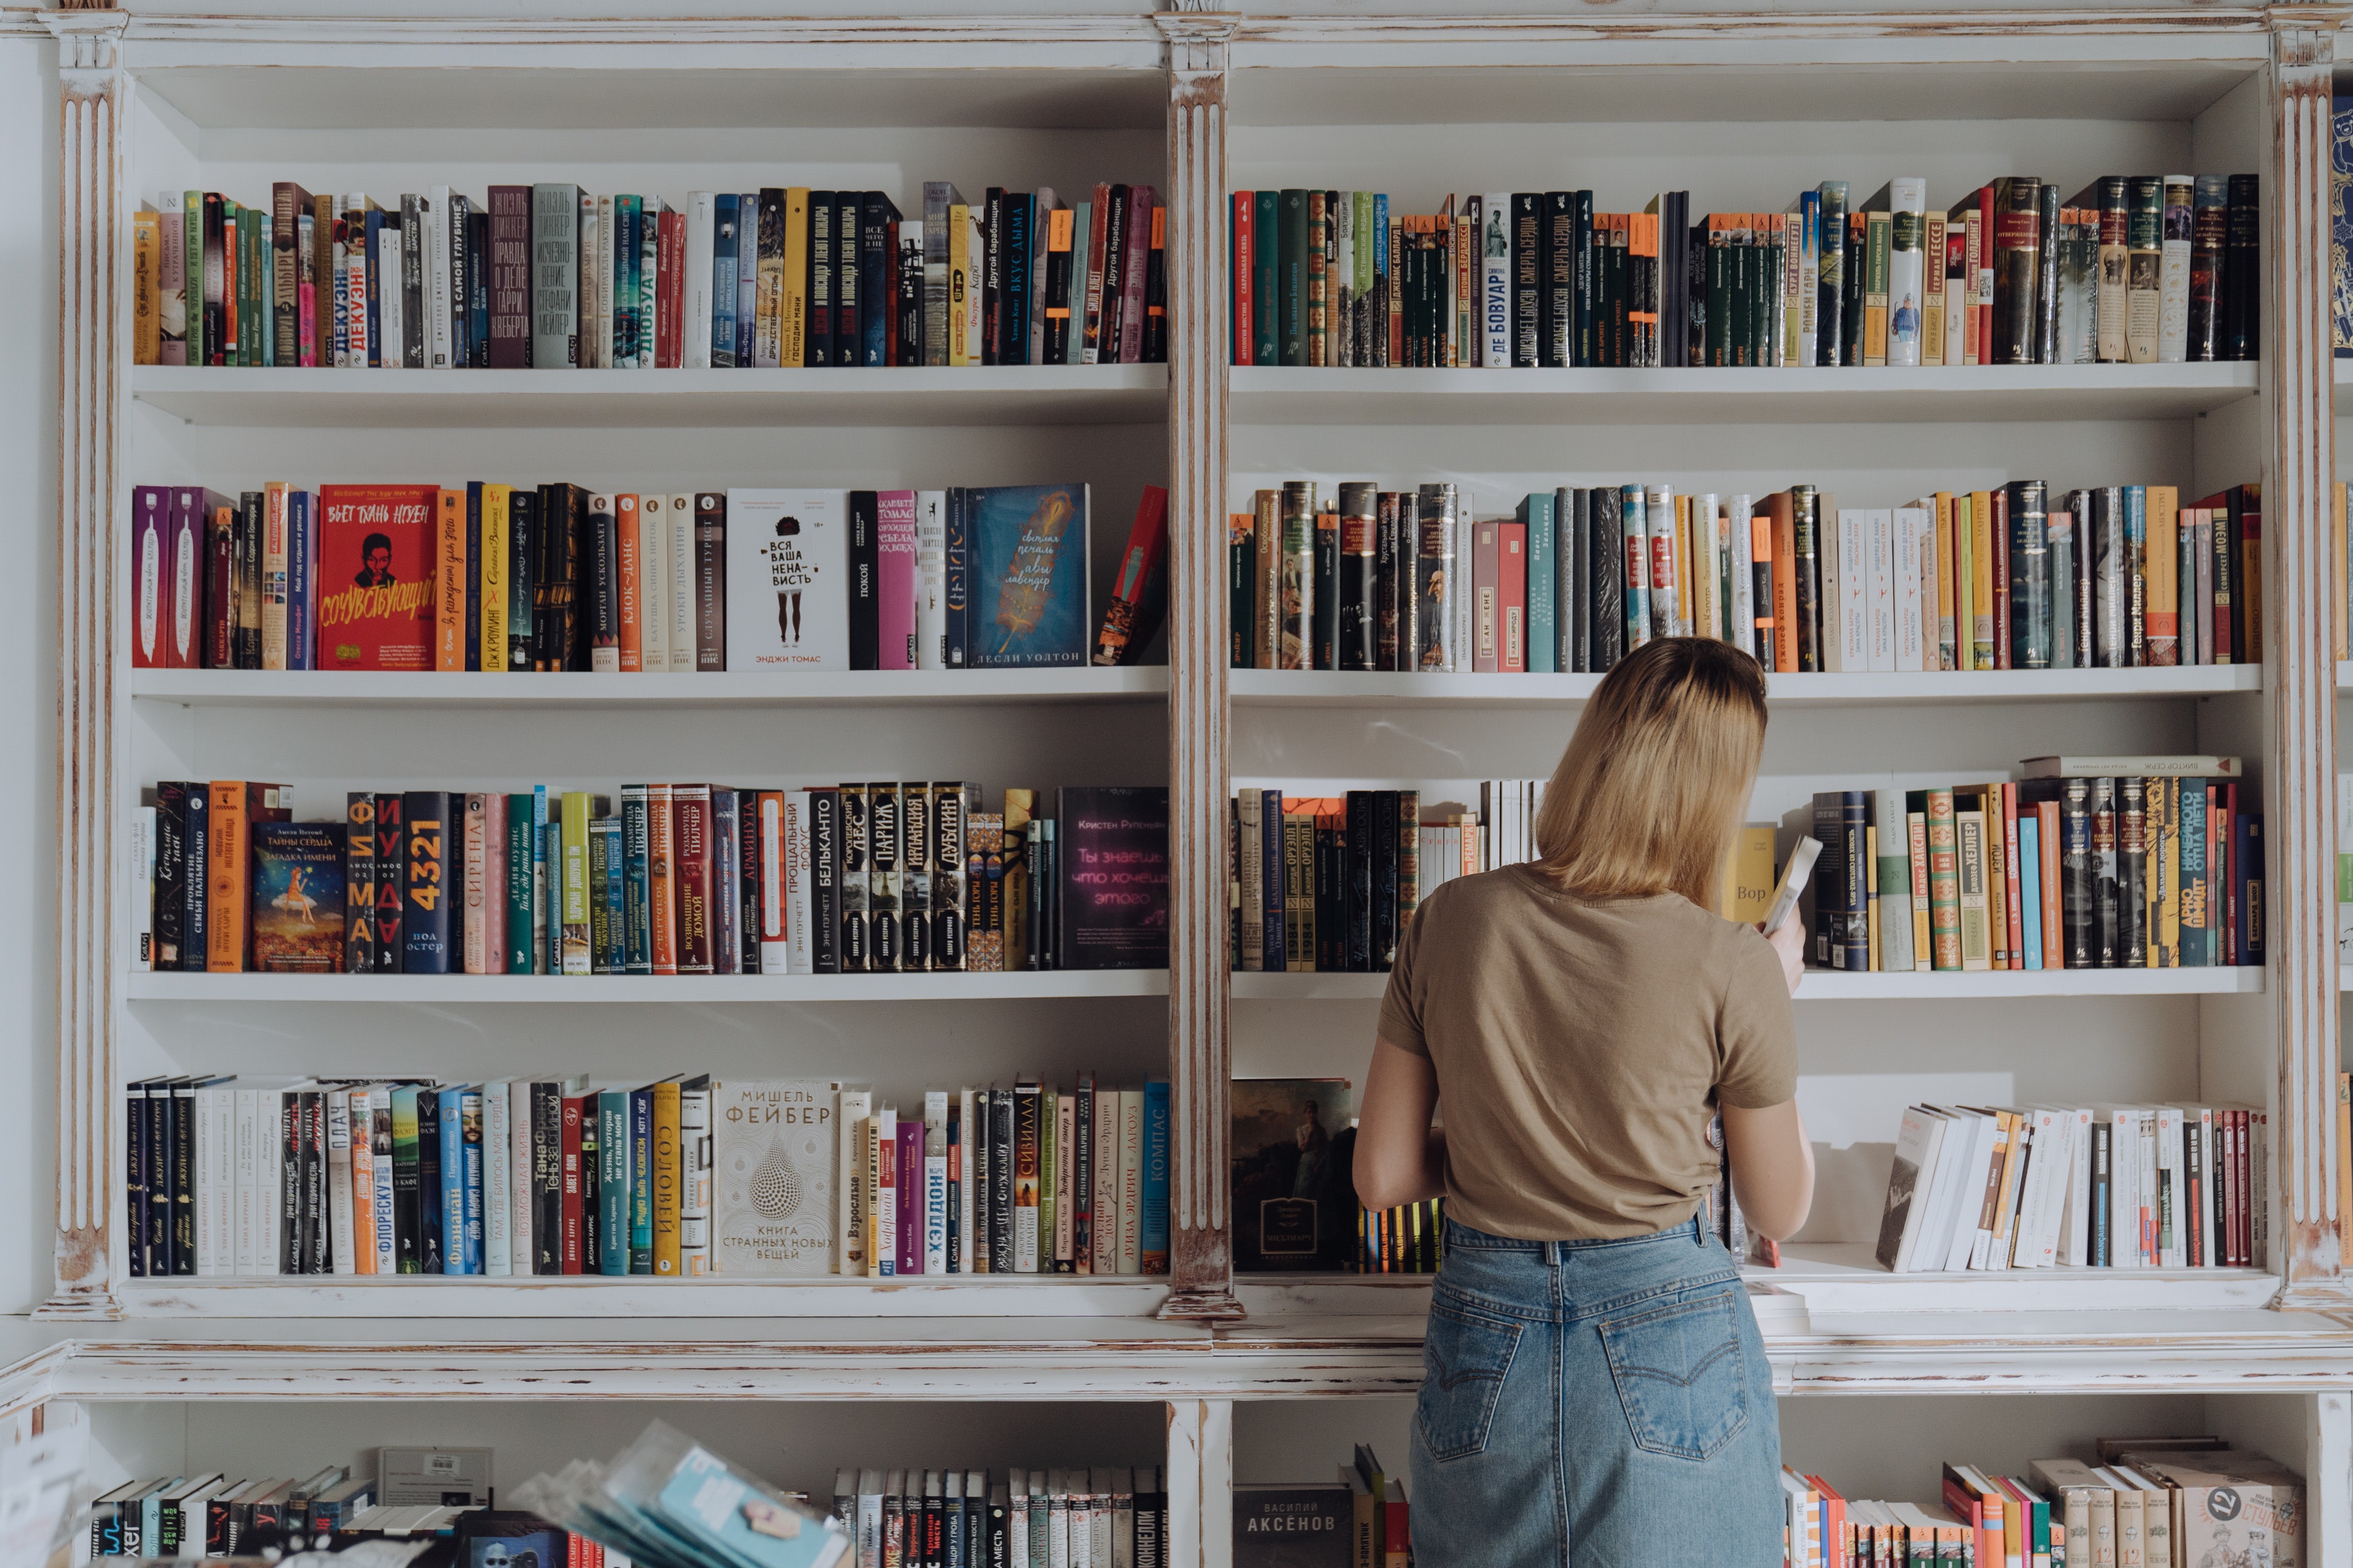 Girl searching for books on a bookshelf